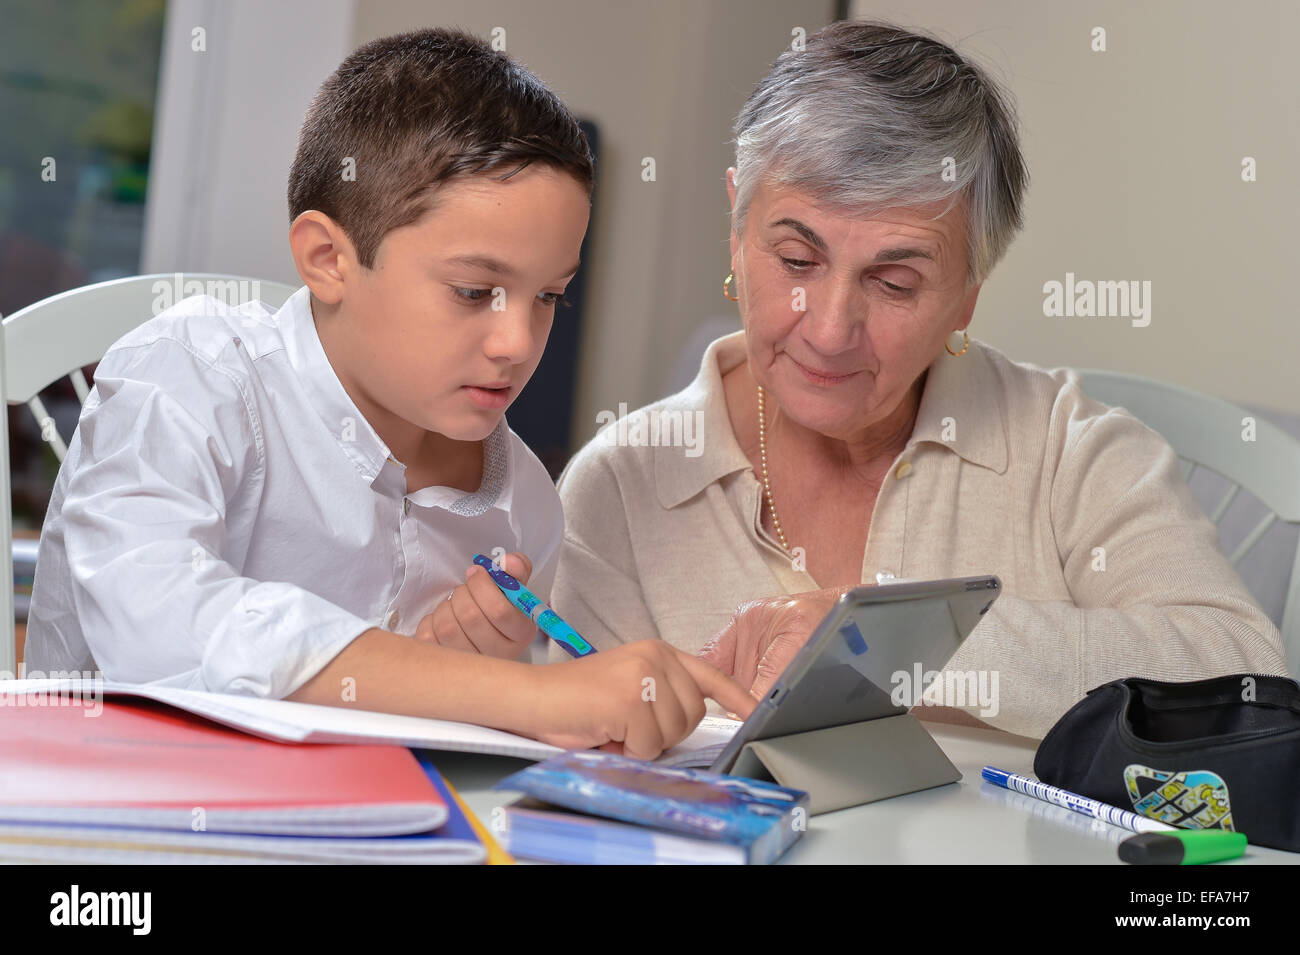 Little boy getting homework help from her grandmother at the table Stock Photo